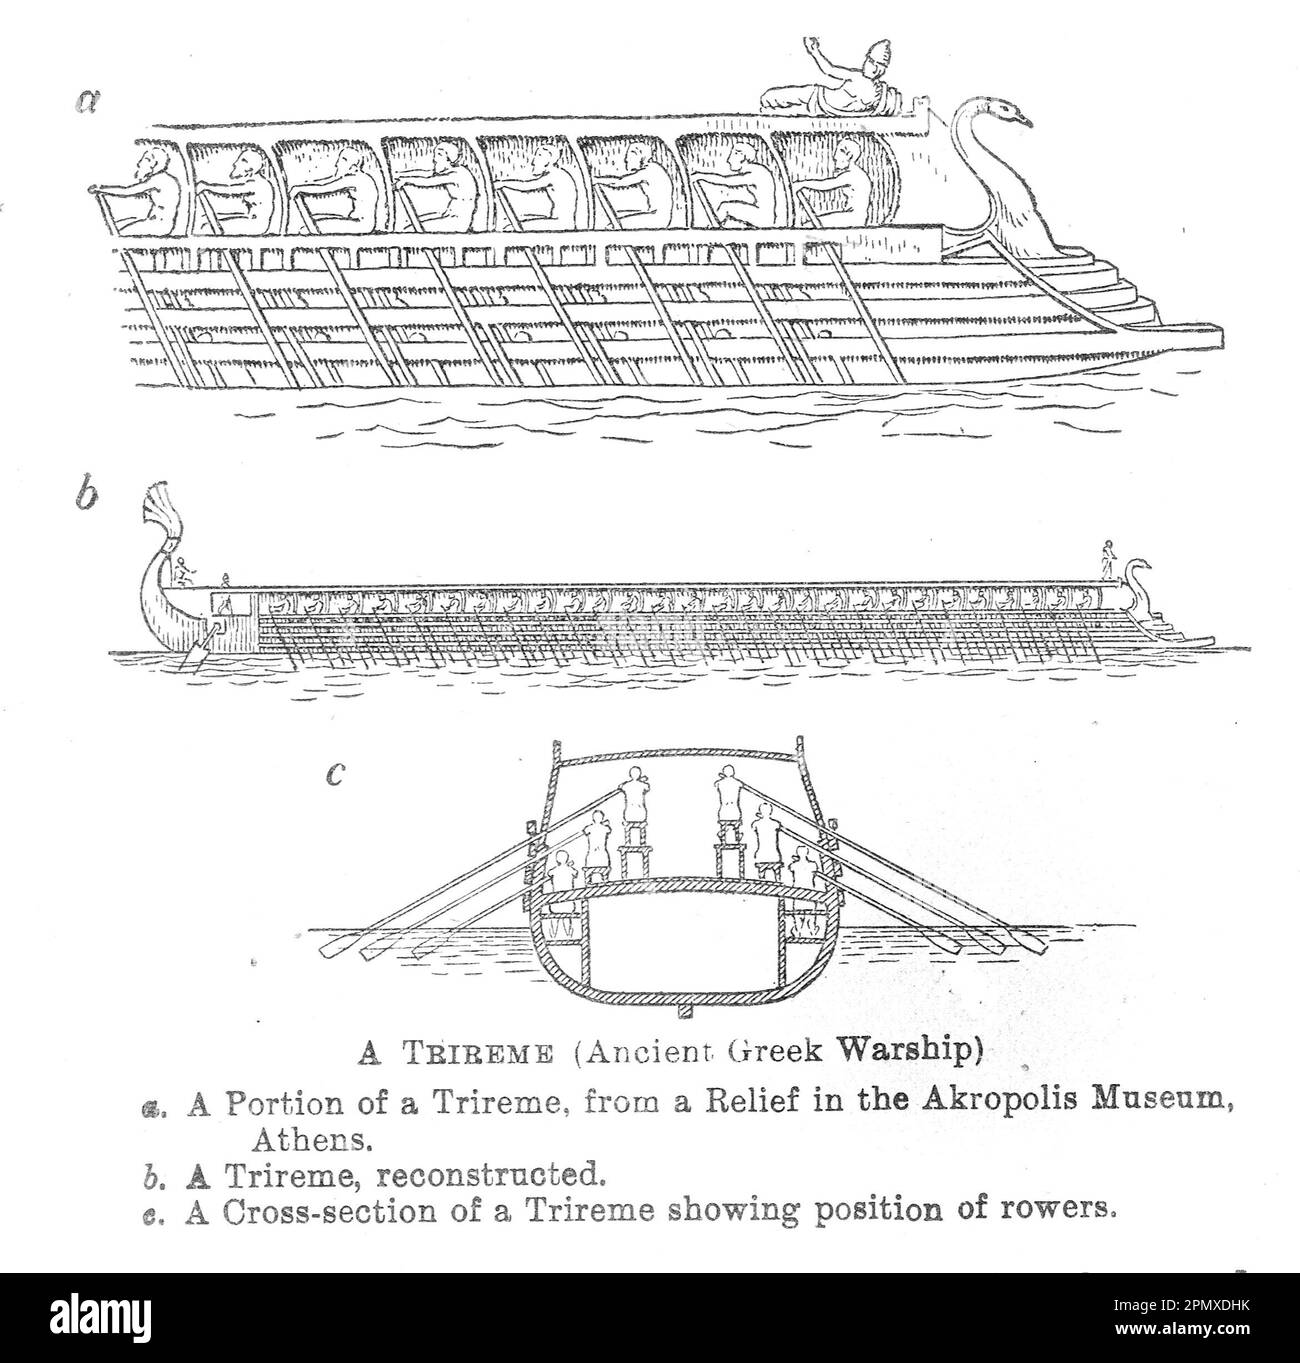 Schematic of a Trireme, an ancient type of galley used by the ancient maritime civilizations of the Mediterranean Sea, especially the Phoenicians, ancient Greeks and Romans. Stock Photo